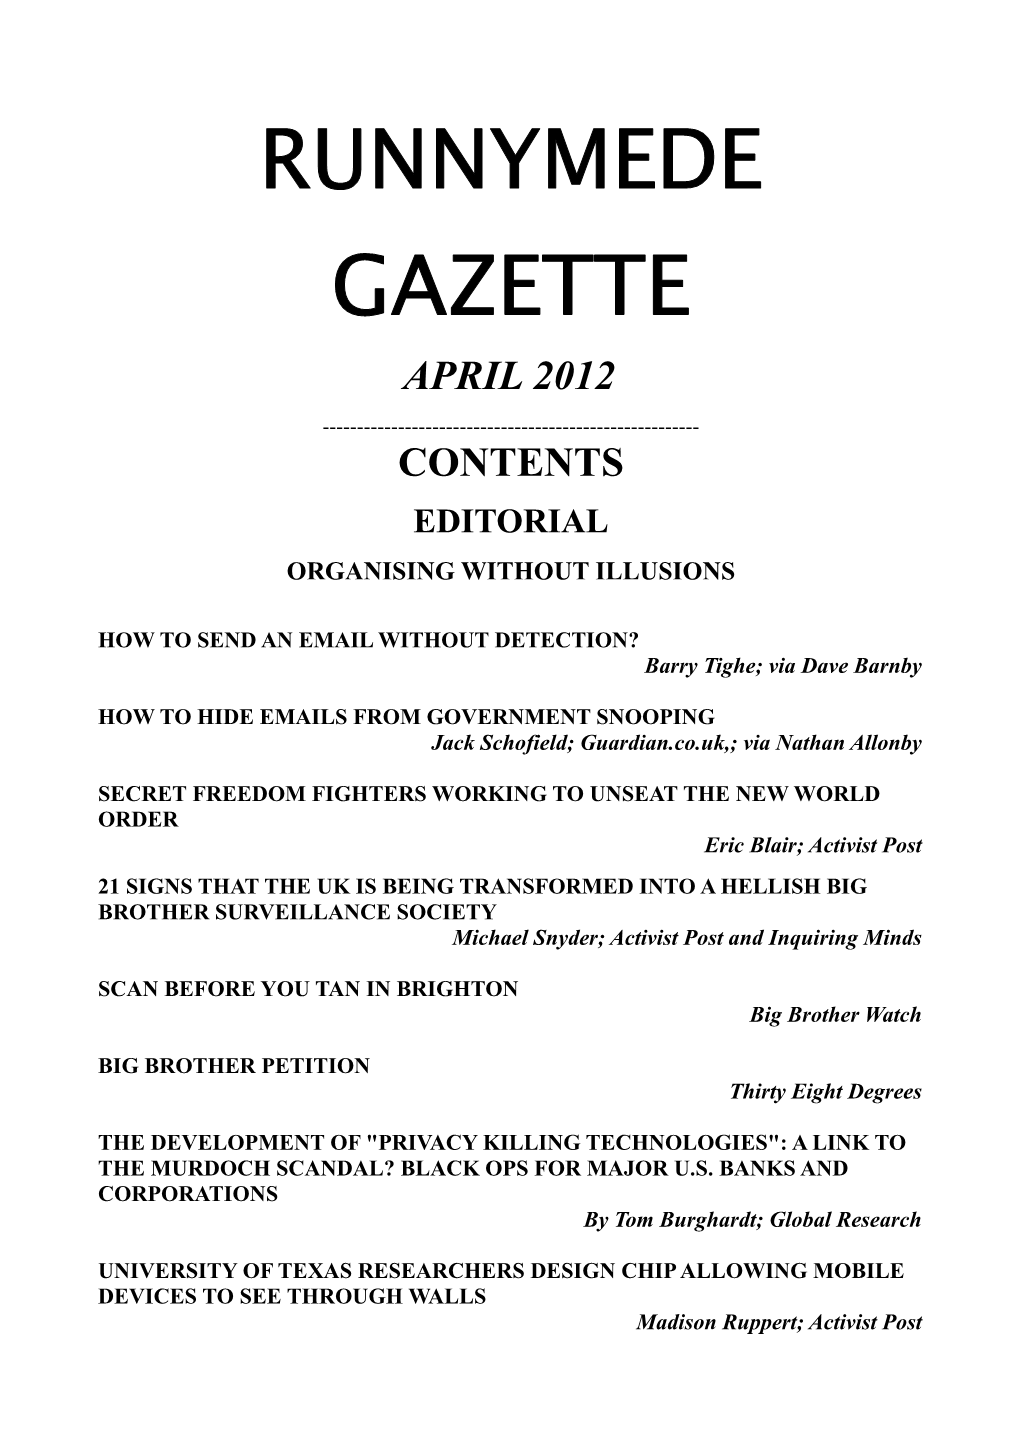 Runnymede Gazette April 2012 ------Contents Editorial Organising Without Illusions